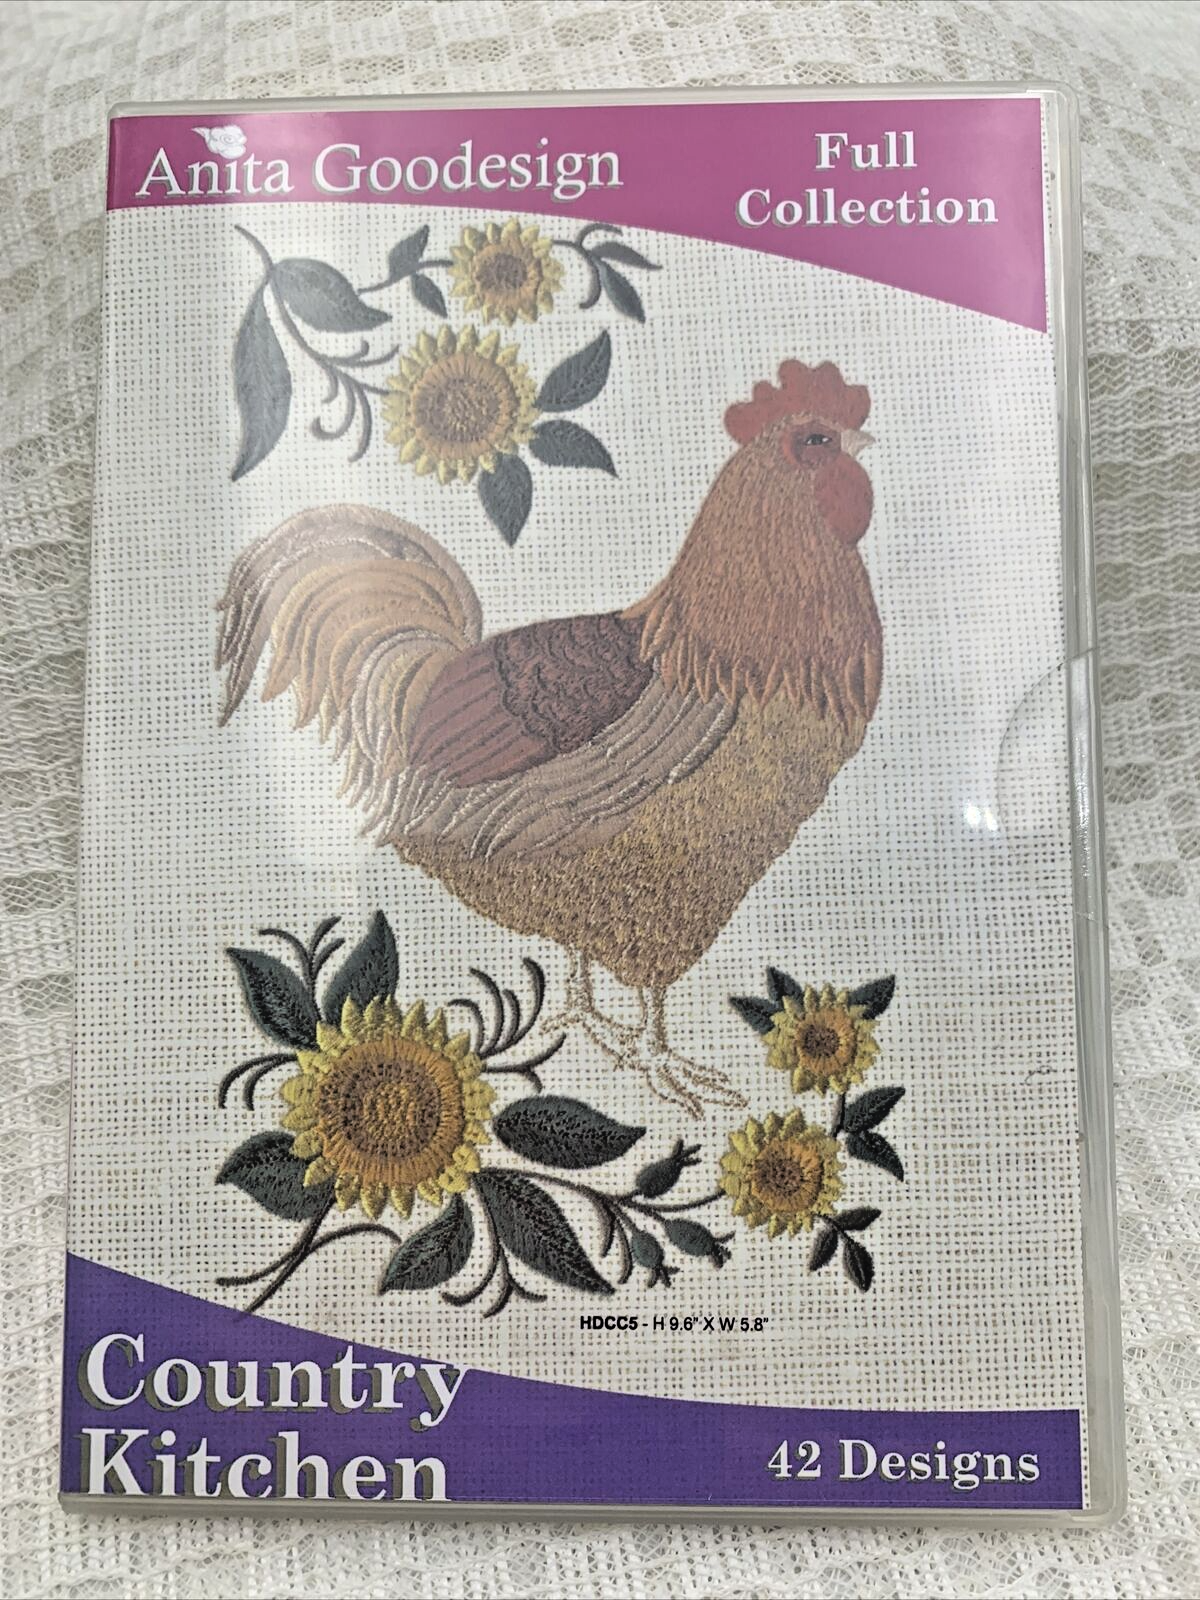 Country Kitchen Embroidery Design Collection - Anita Goodesign CD (39AGHD) - $18.99